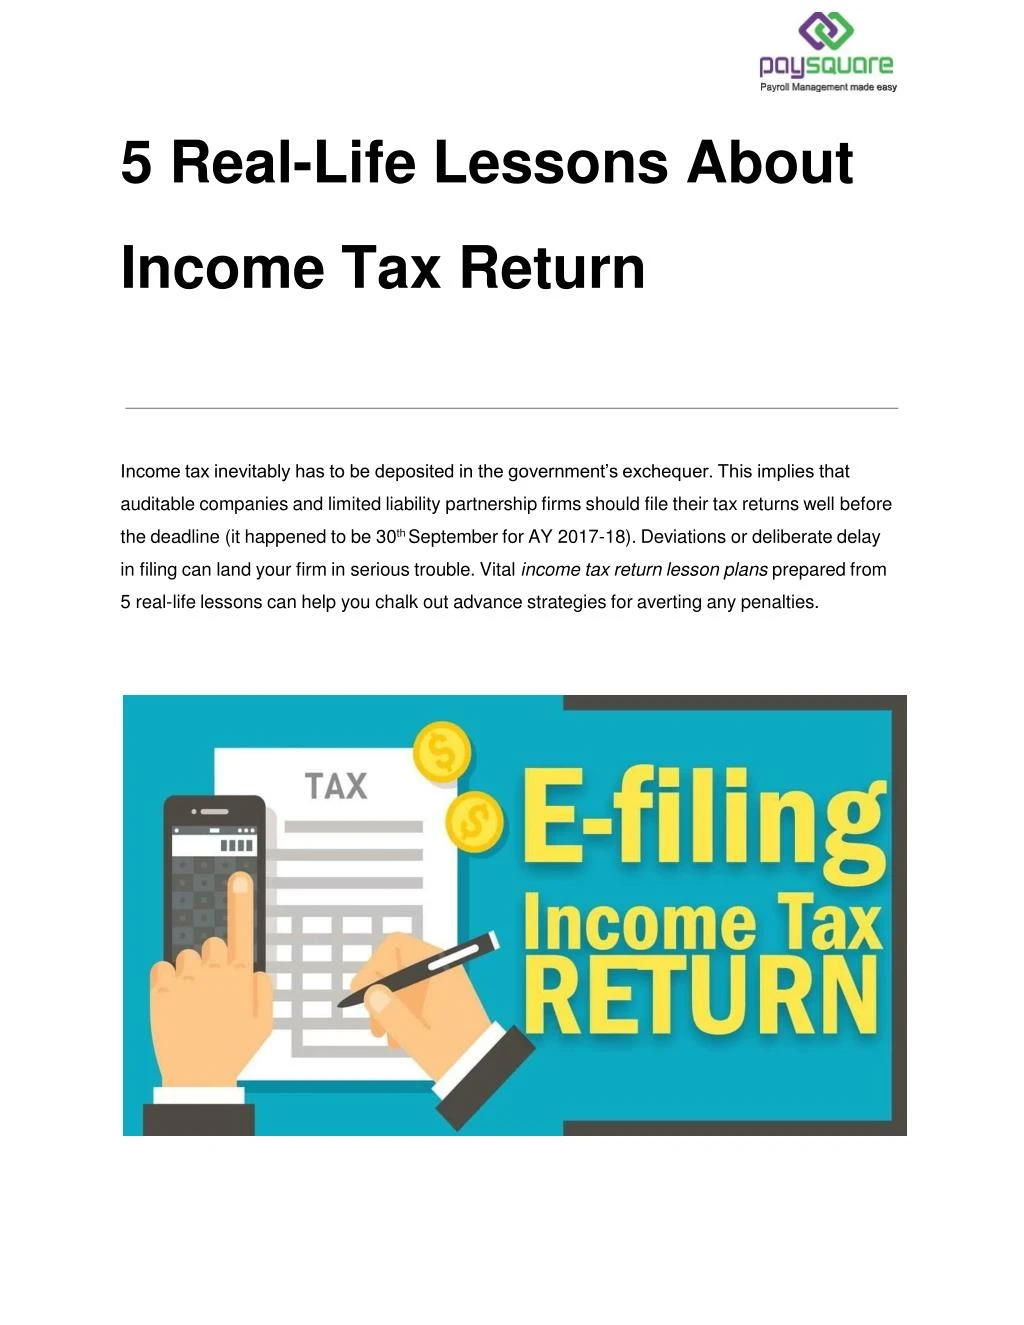 5 real life lessons about income tax return